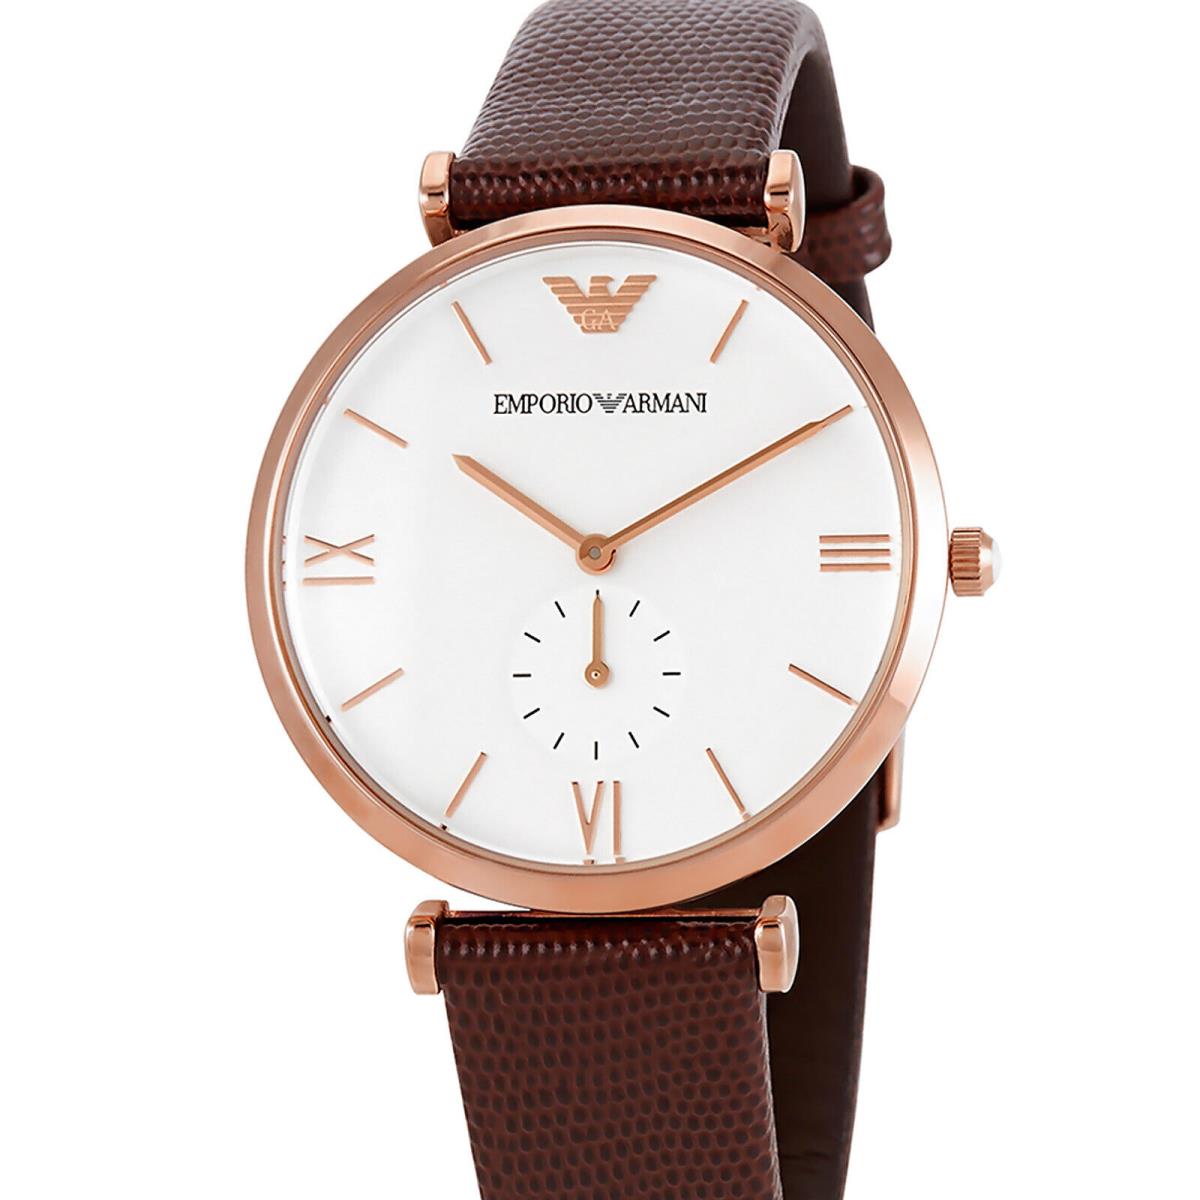 Emporio Armani Mens Retro T-bar Dress Watch Rose Gold White Dial Brown Leather - White Dial, Brown Band, Rose Gold Bezel